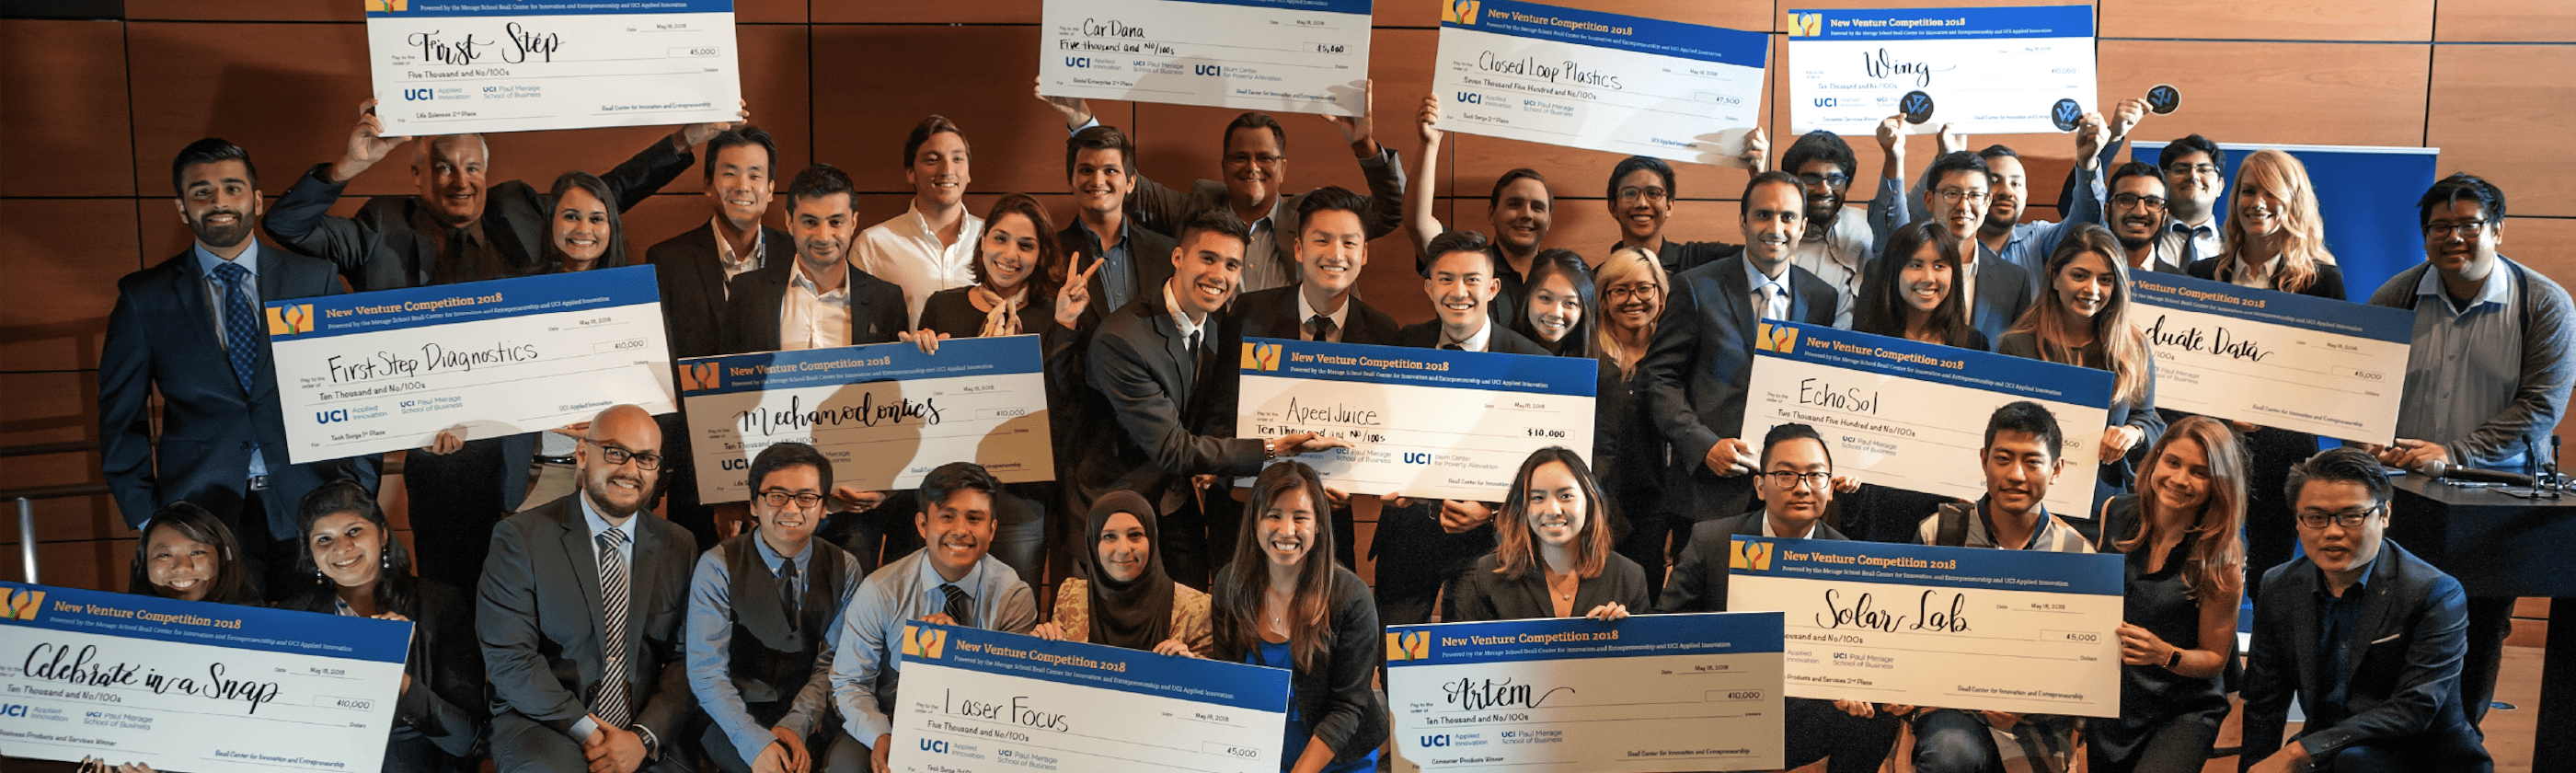 New Venture Competition Workshop 1: Ideation and Brainstorming – 1/16/19